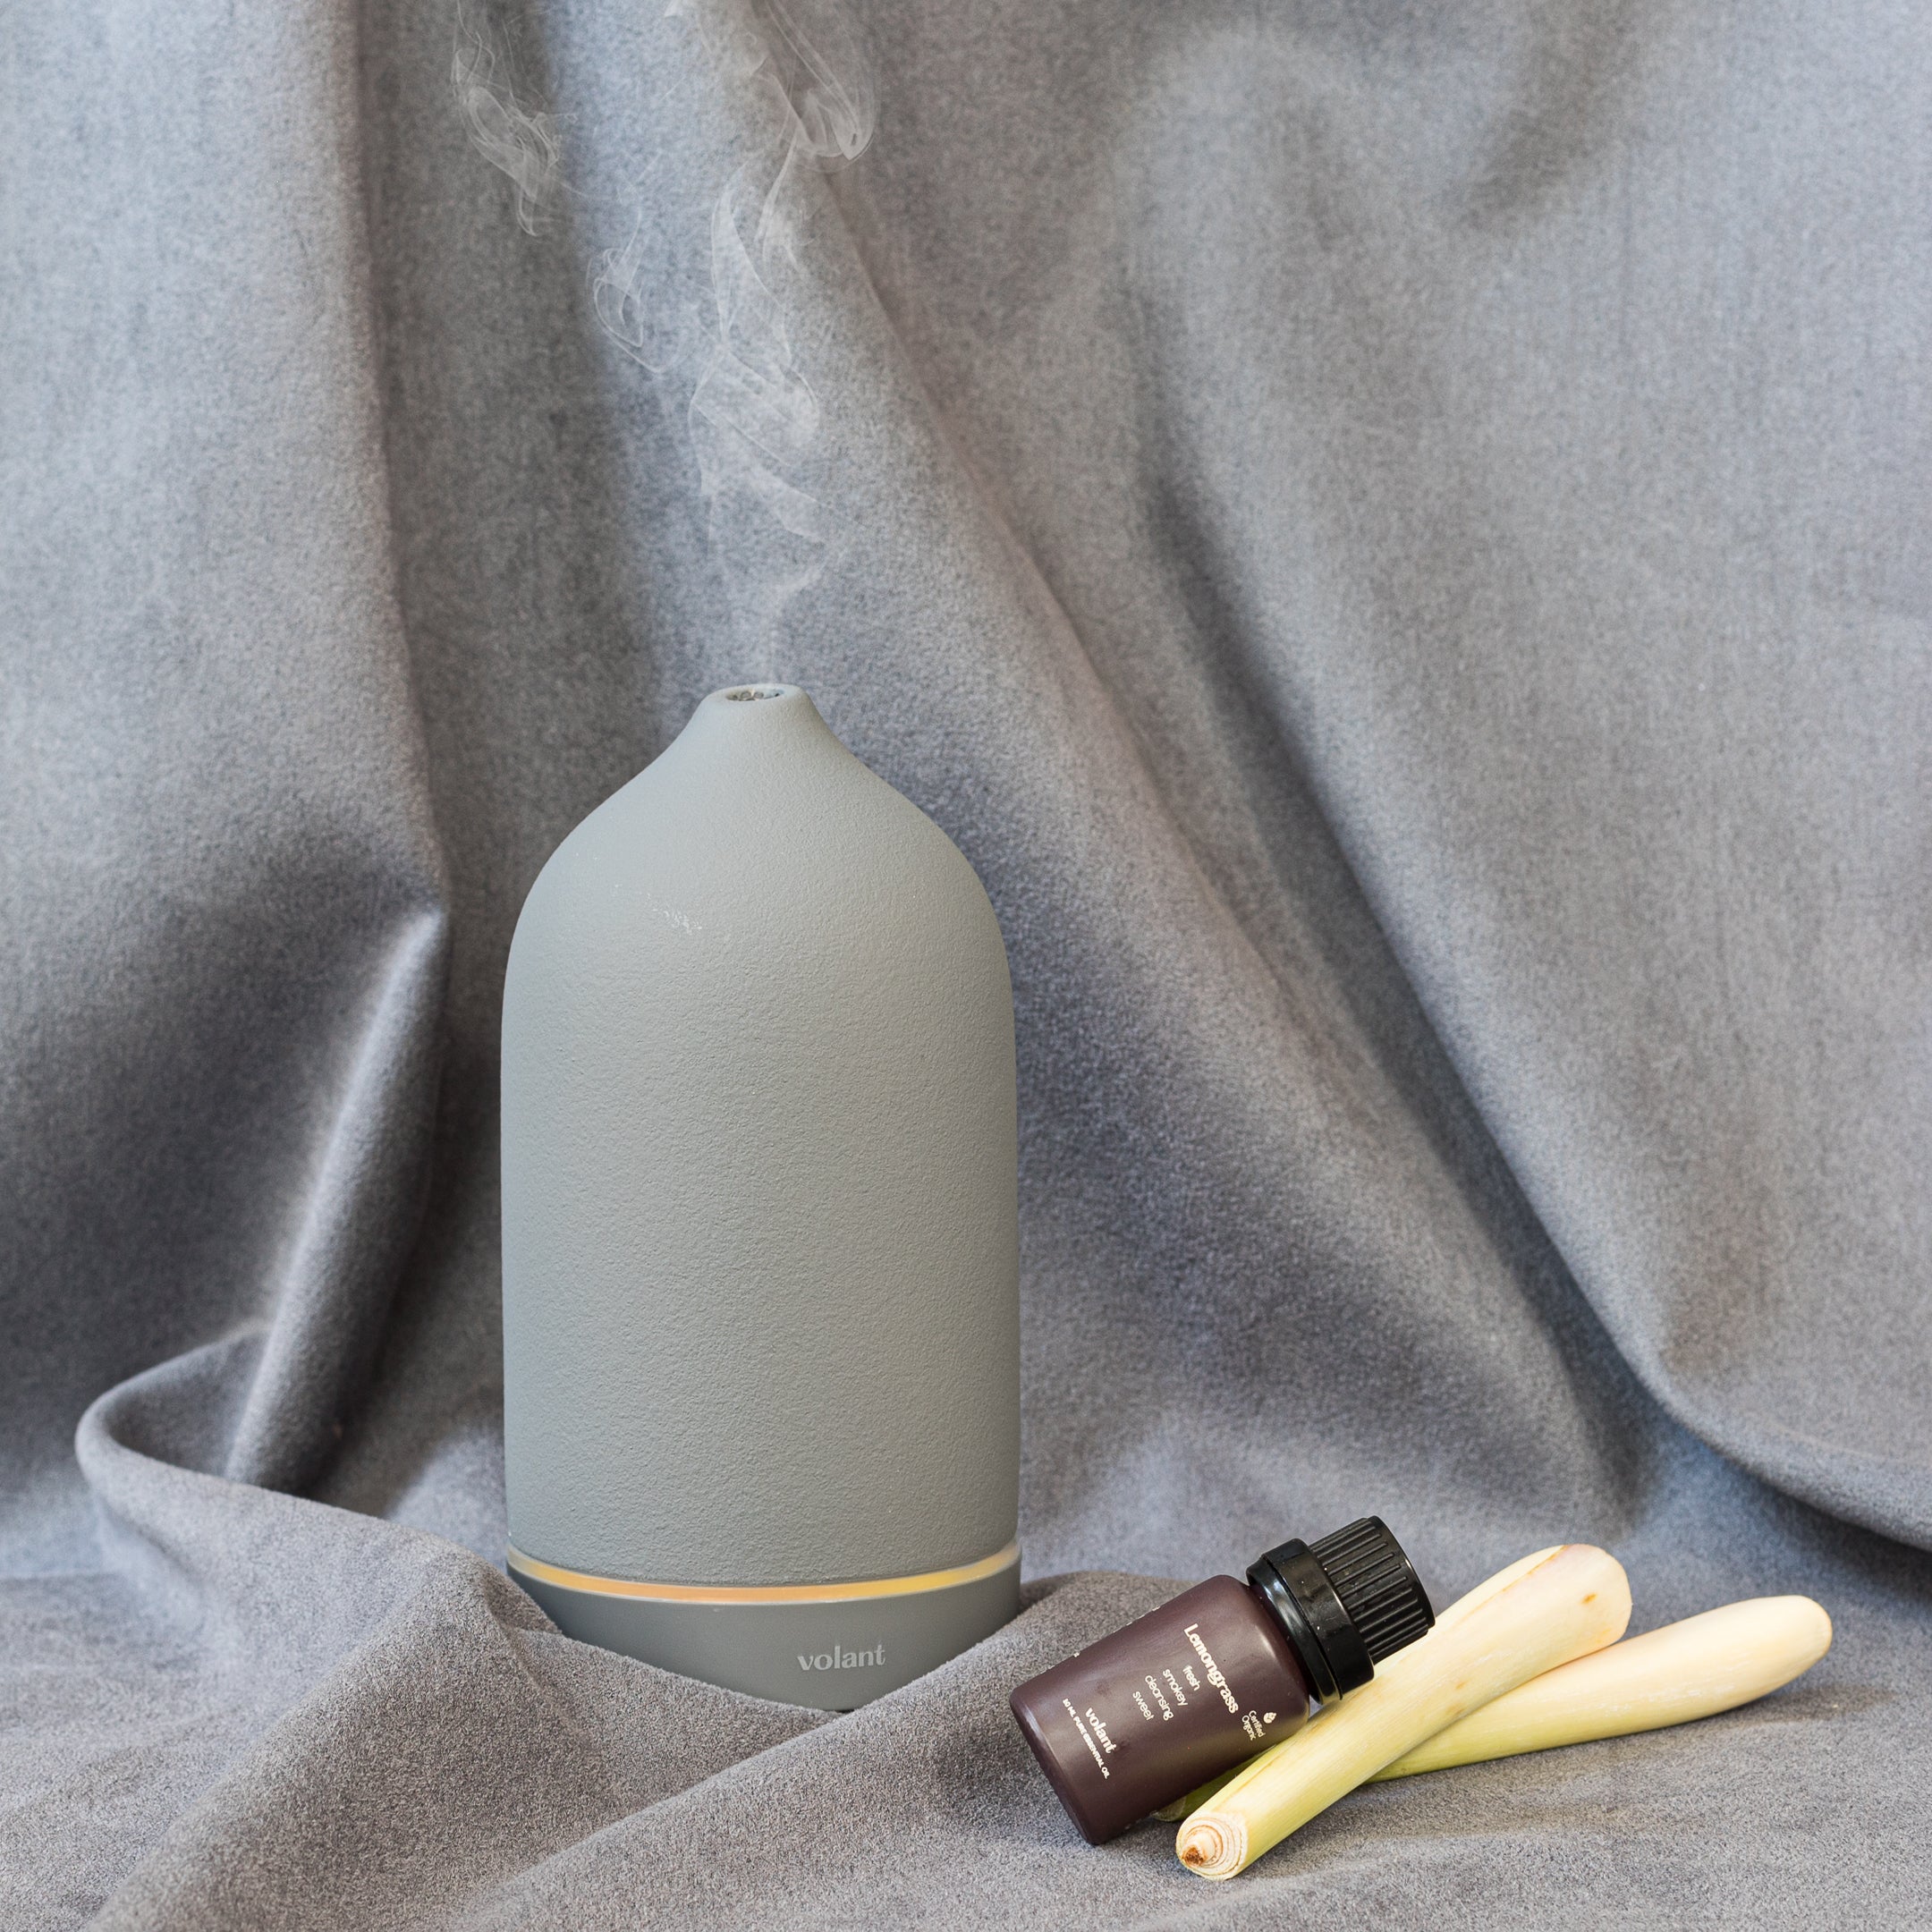 volant grey diffuser using organic lemongrass essential oil to repel insects